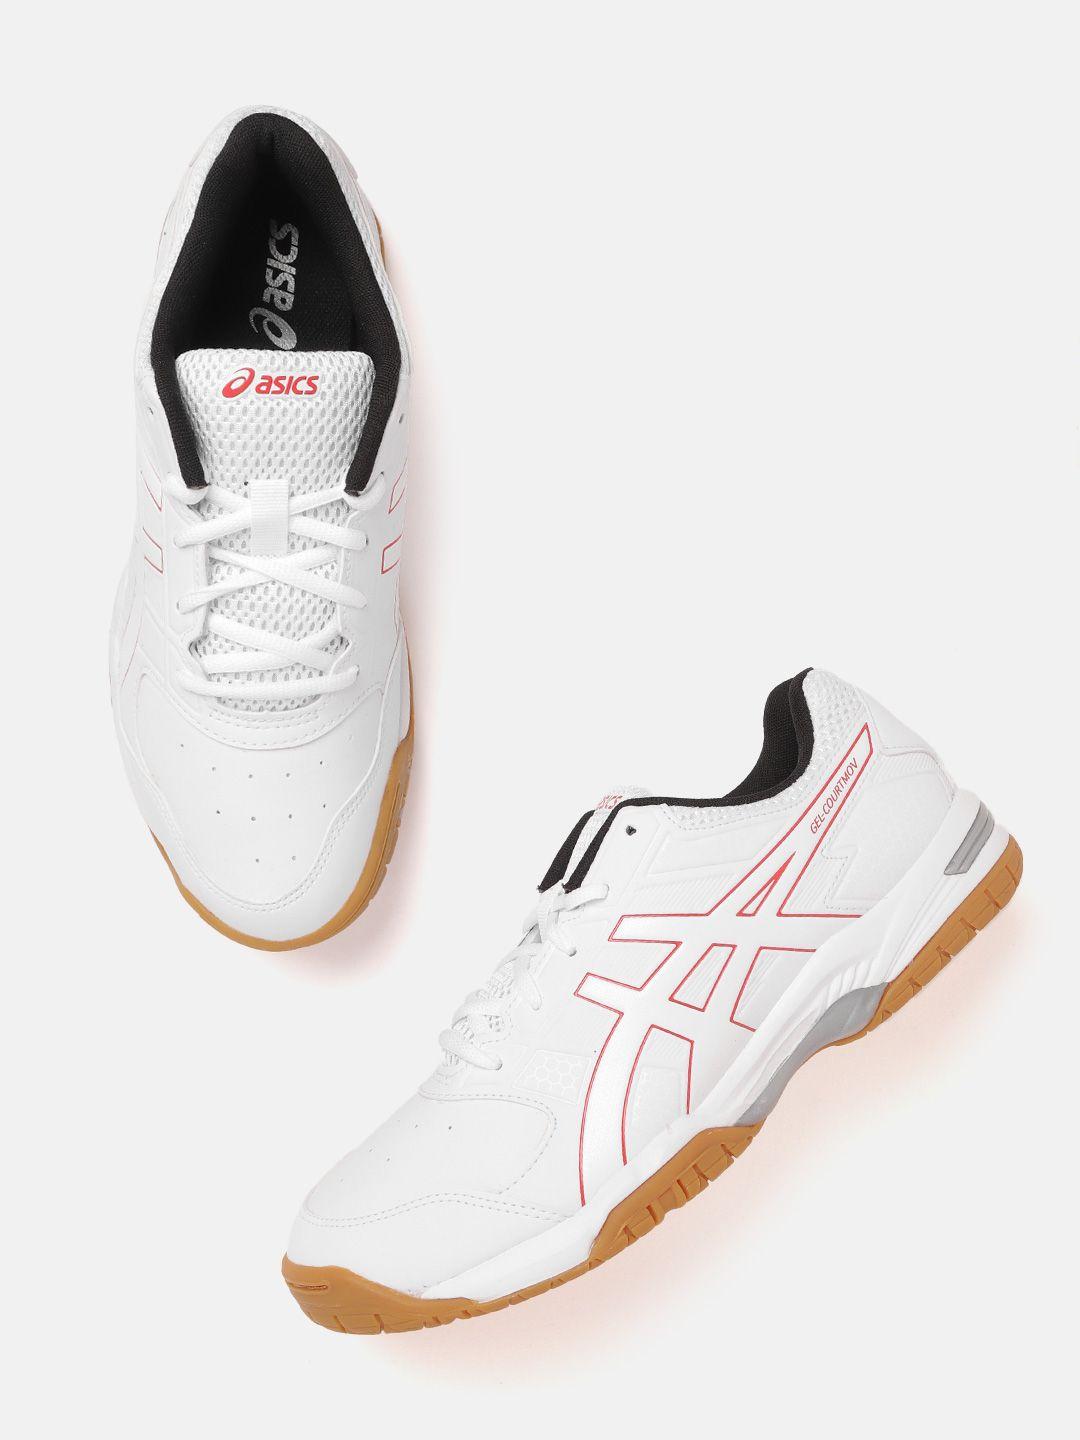 asics men white & red perforated gel-courtmov badminton shoes